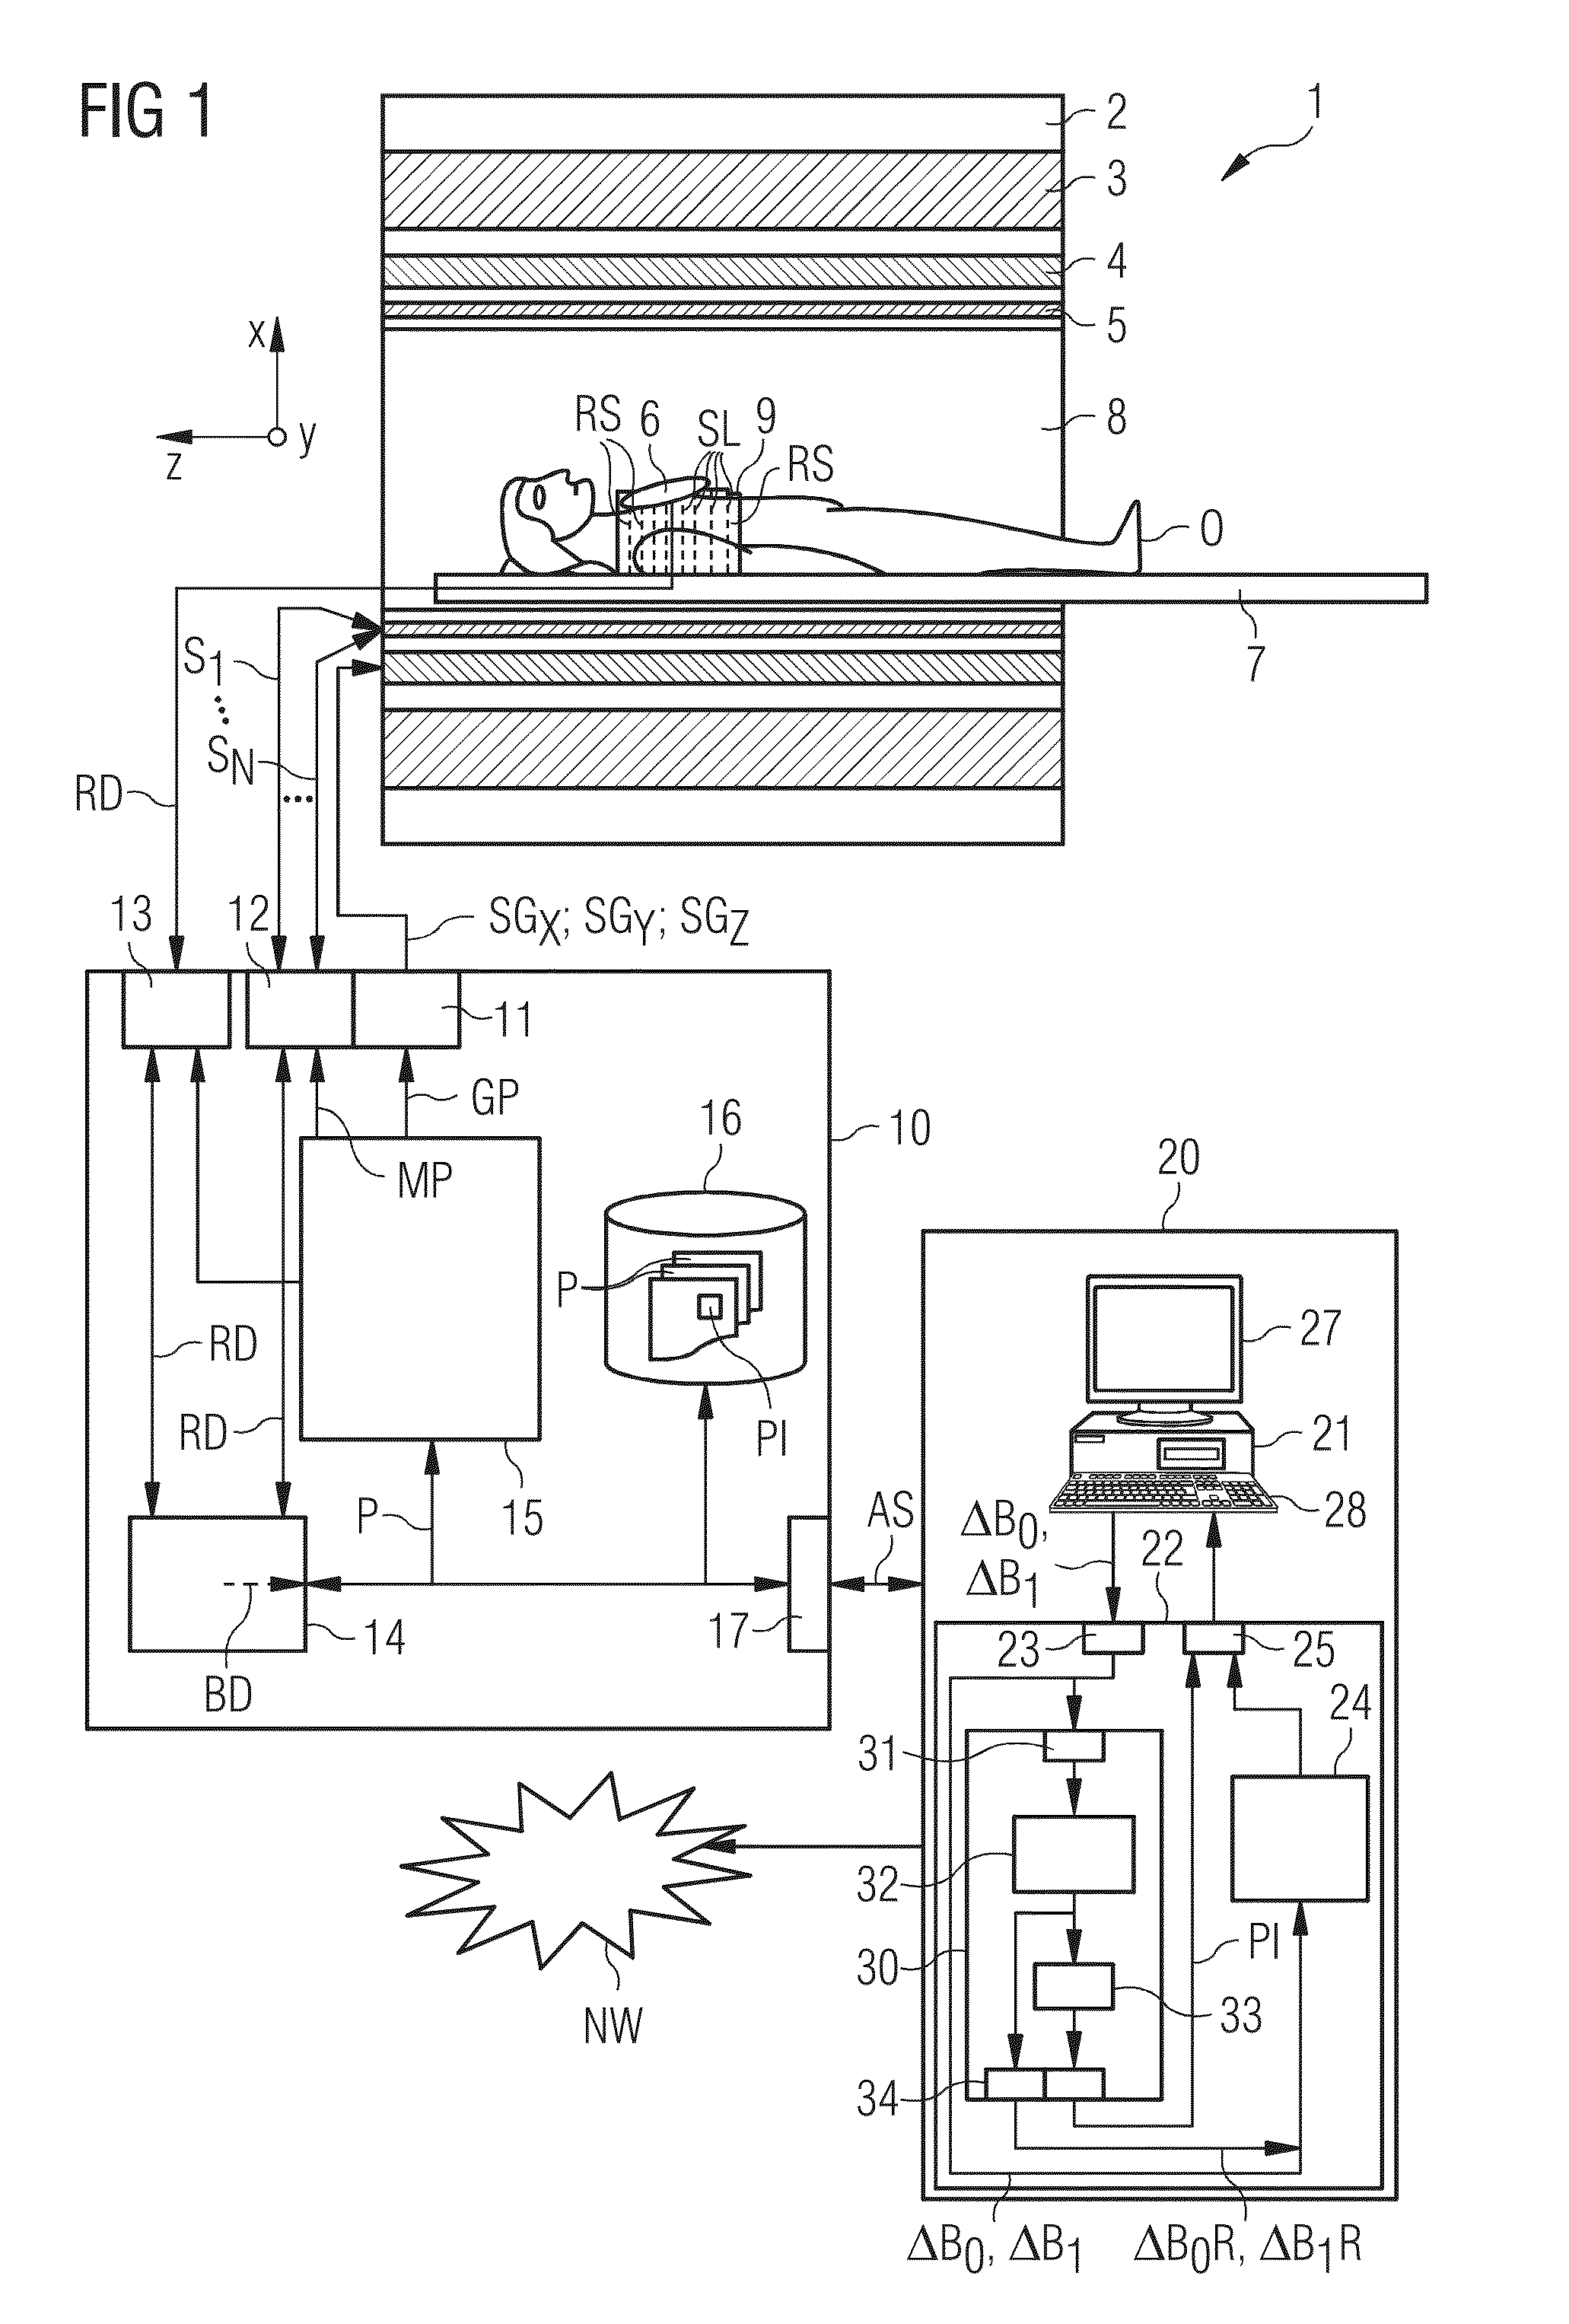 Establishing a Magnetic Resonance System Actuation Sequence